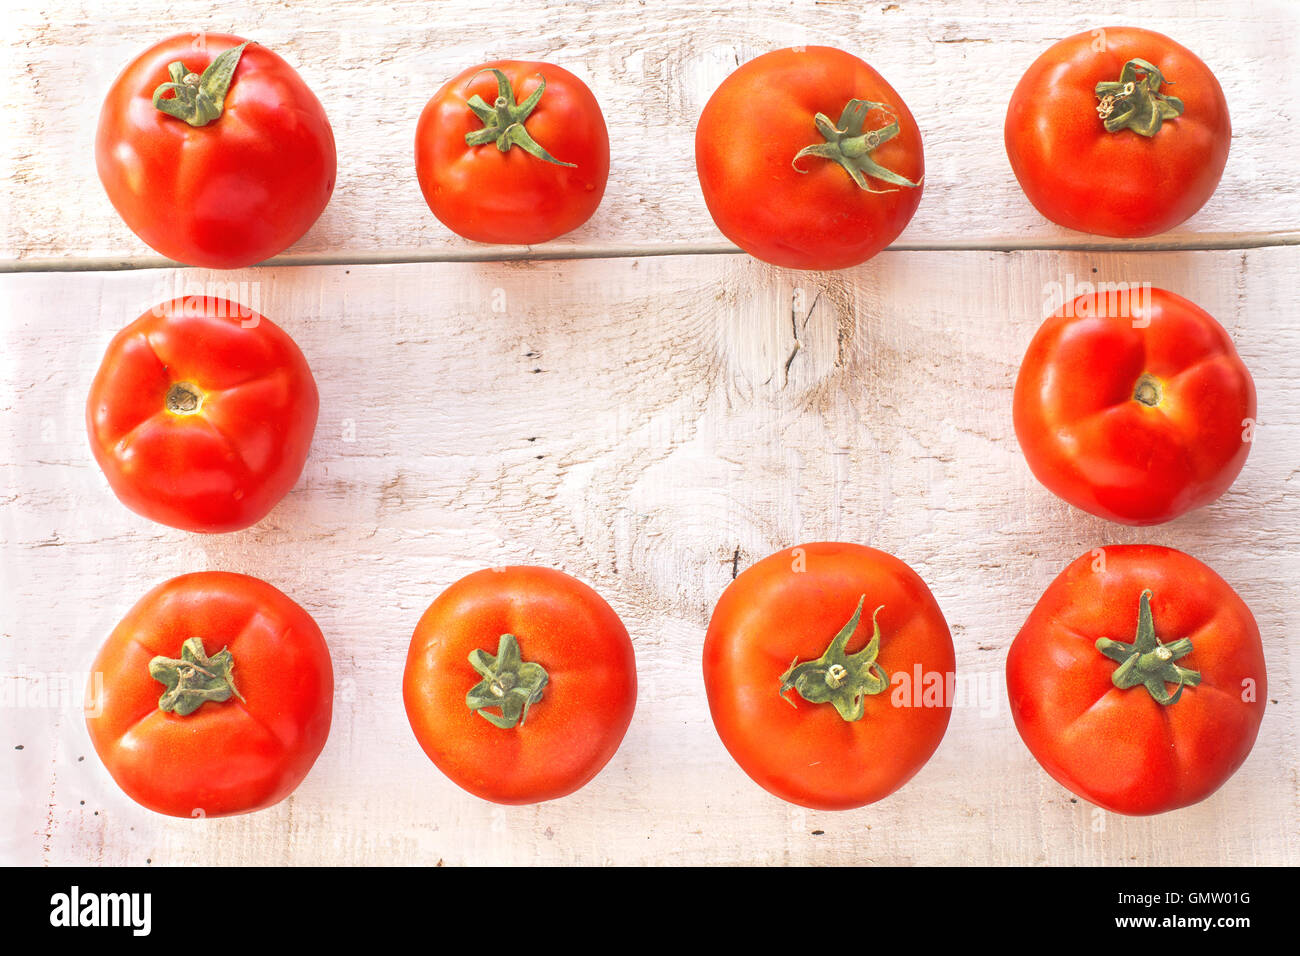 Tomatoes on white wooden surface Stock Photo